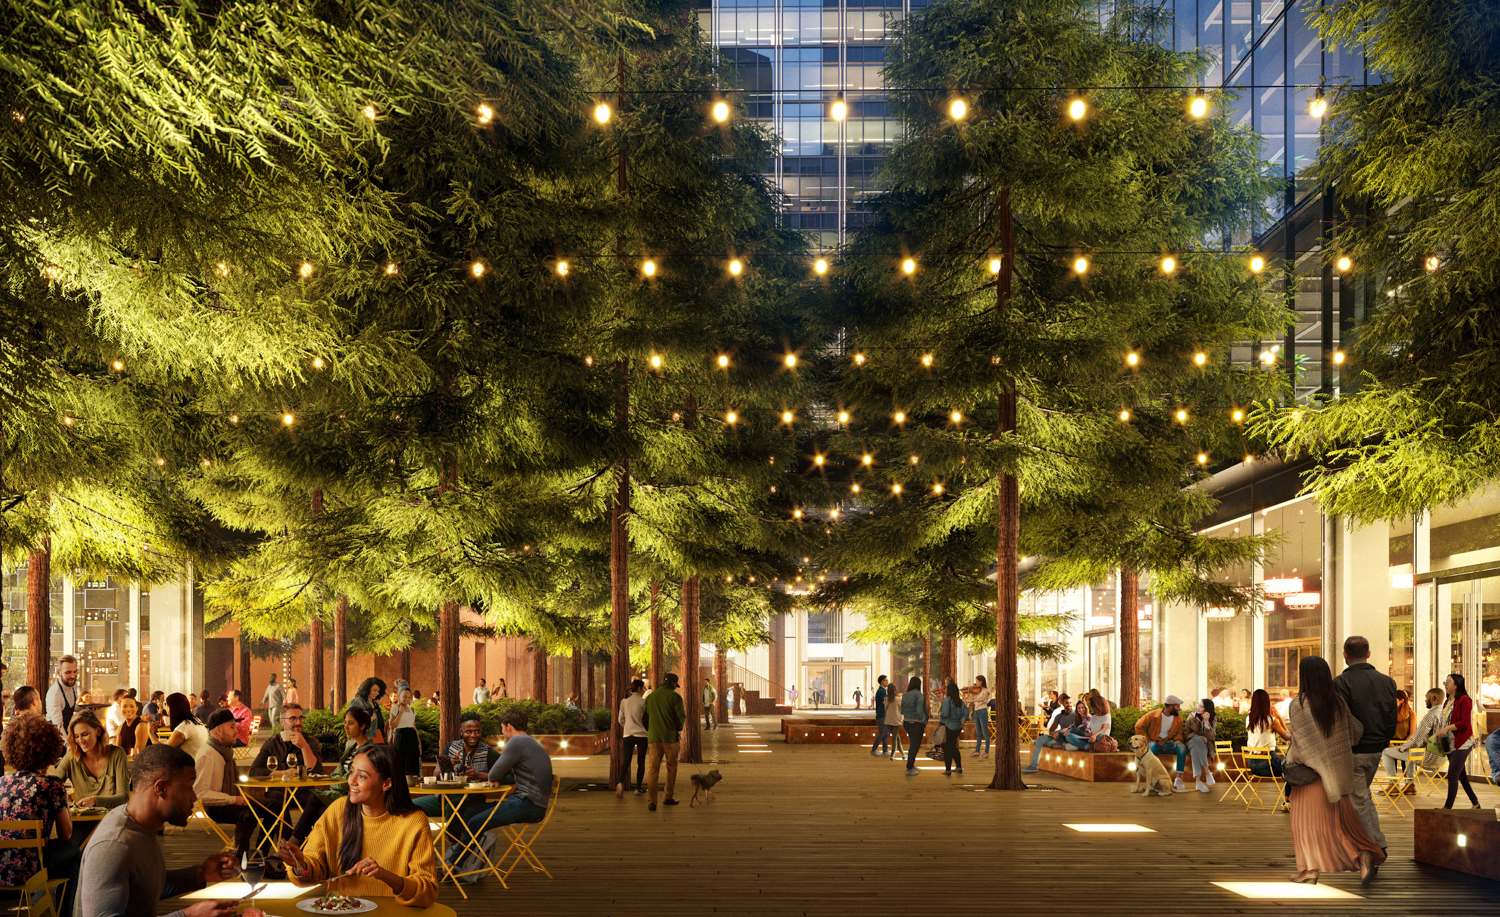 The City Grove urban forest looking towards 200 Mission, design by PWP Landscape Architecture